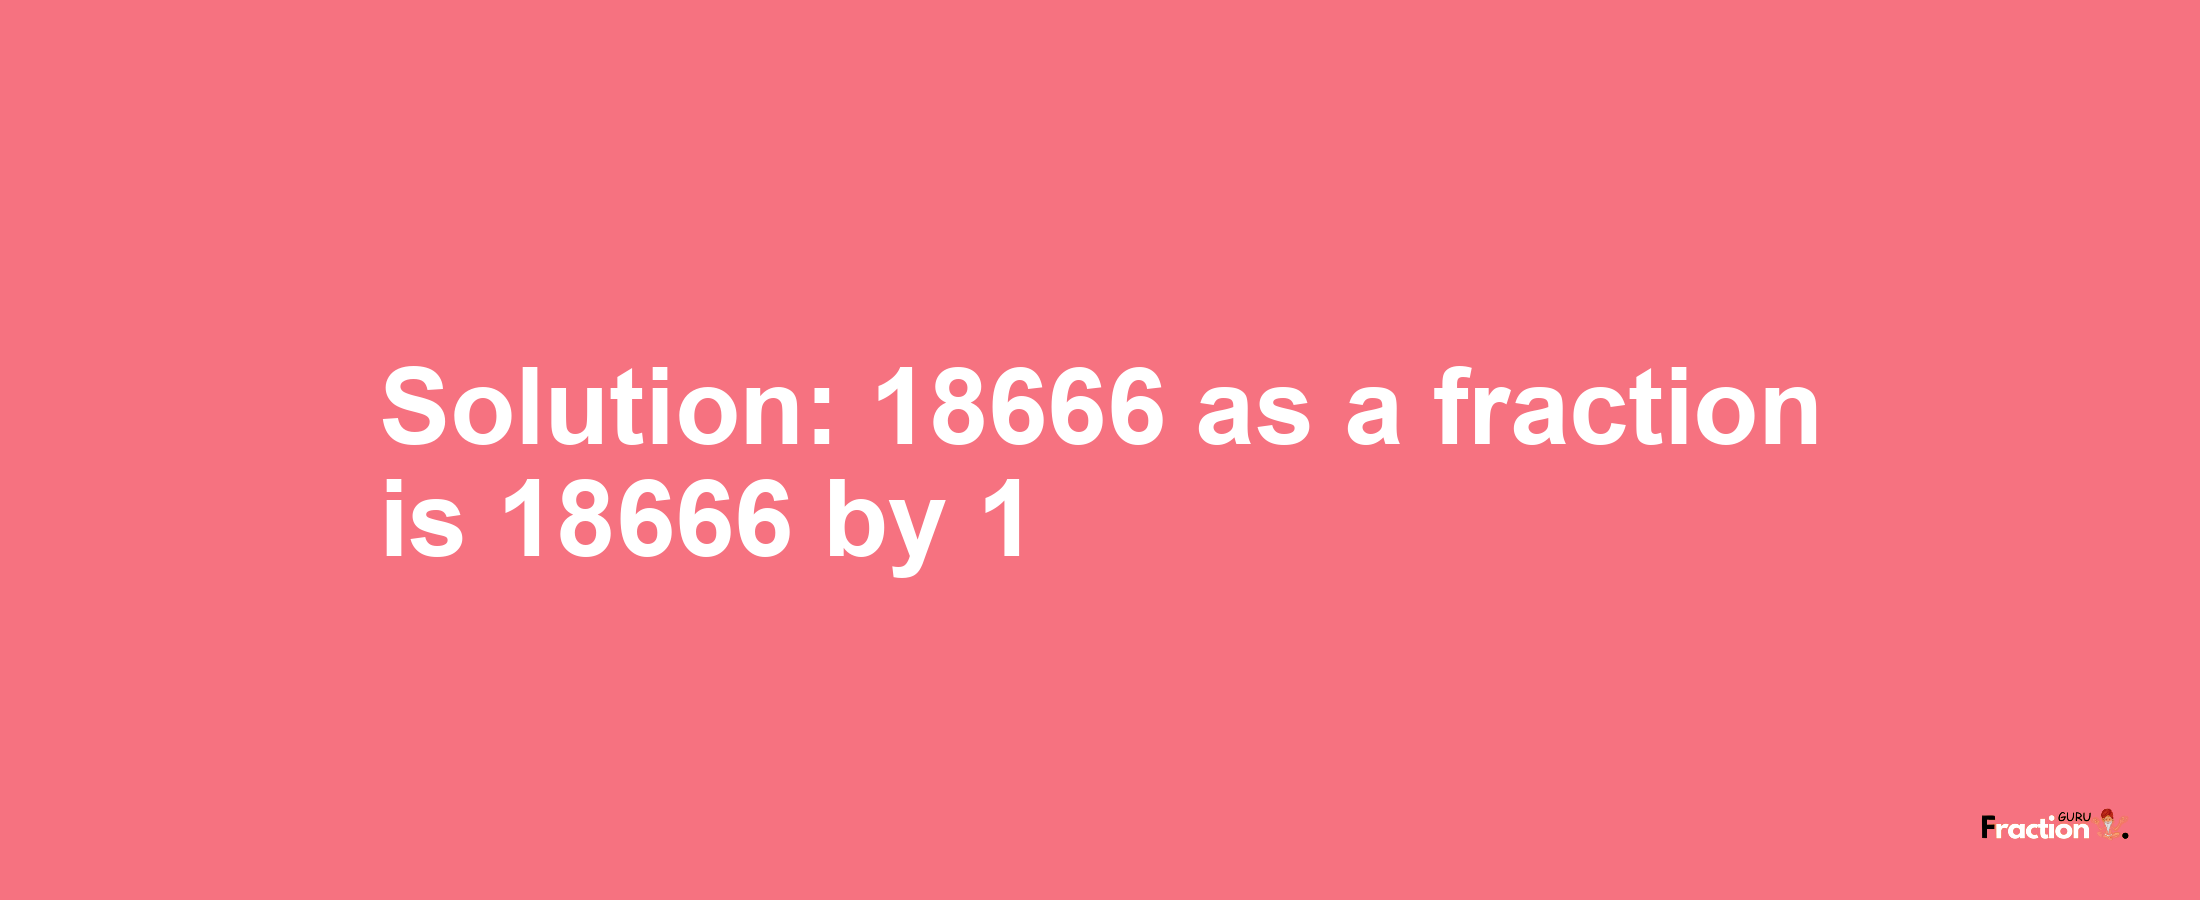 Solution:18666 as a fraction is 18666/1